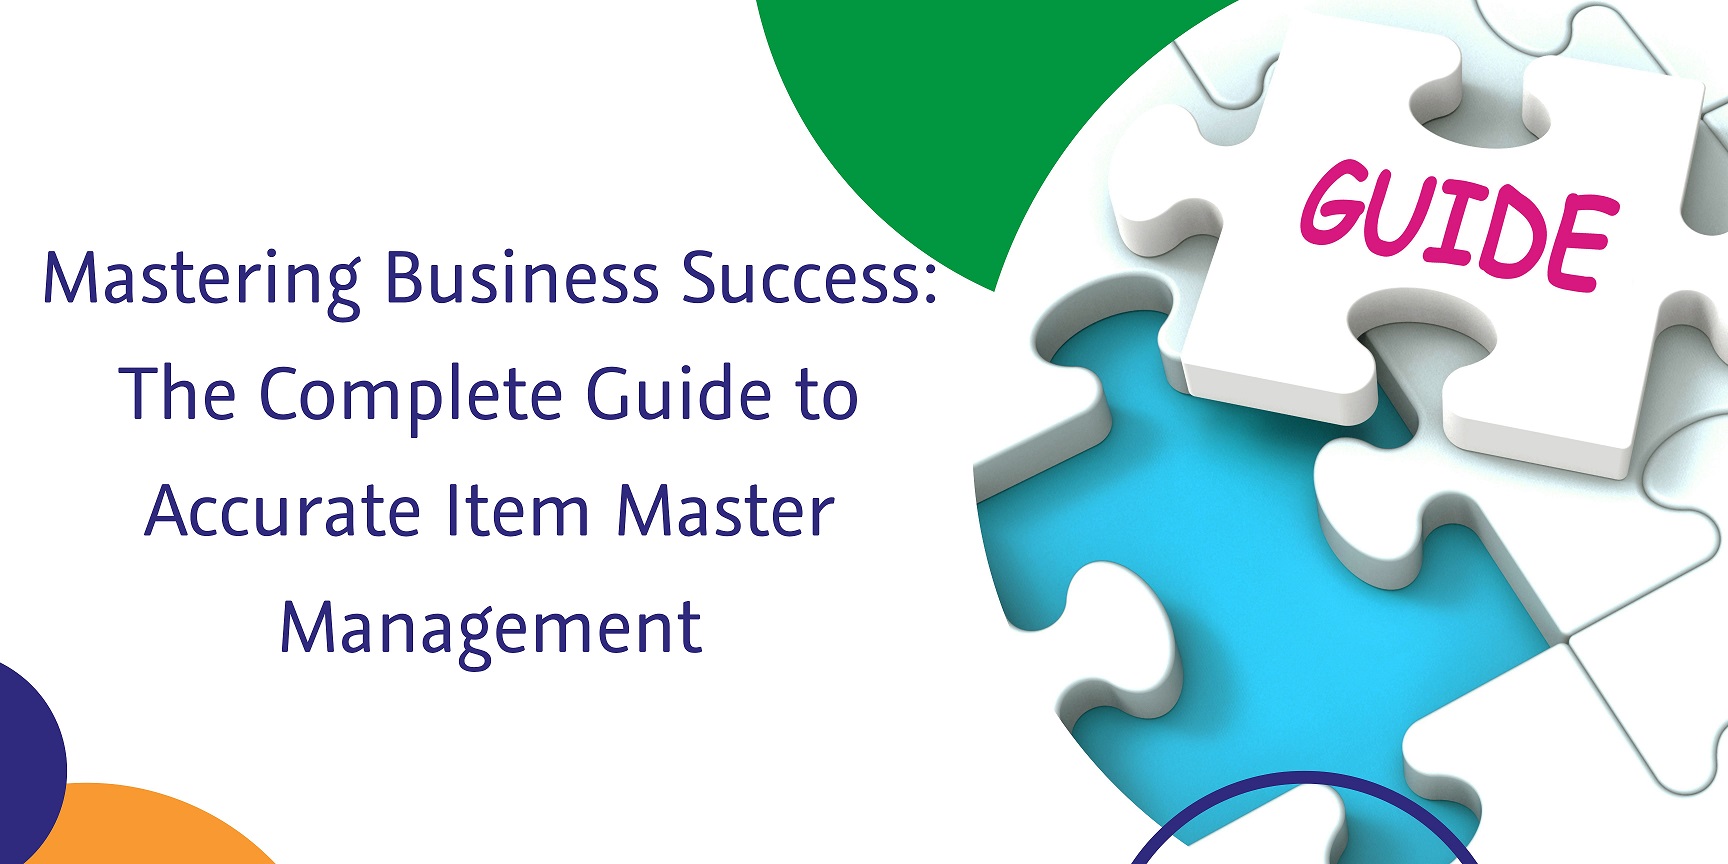 CaptainBiz: Mastering Business Success The Complete Guide to Accurate Item Master Management